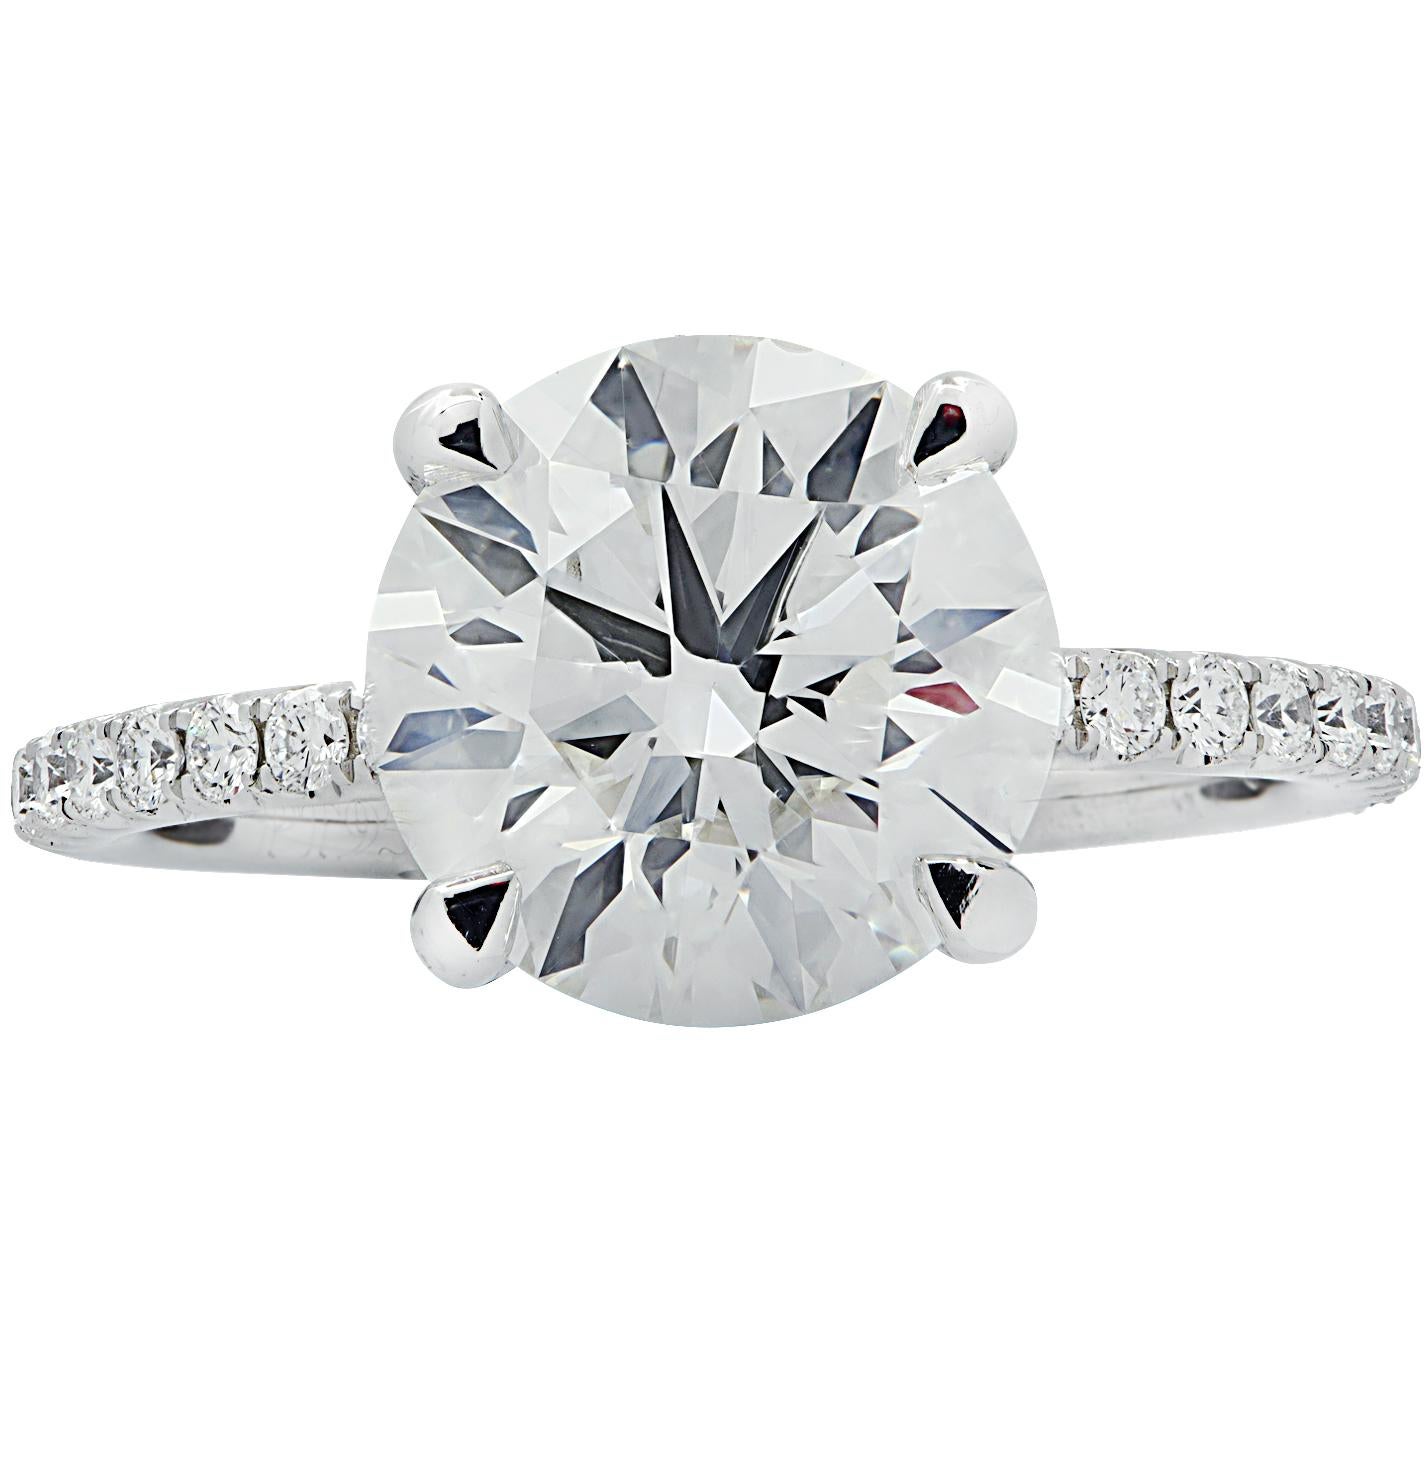 Exquisite engagement ring crafted in platinum showcasing a stunning GIA certified round brilliant cut diamond weighing 3.56 carats, I color, SI1 clarity. The band is encrusted with 22 round brilliant cut diamonds weighing .29 carats total, G color,